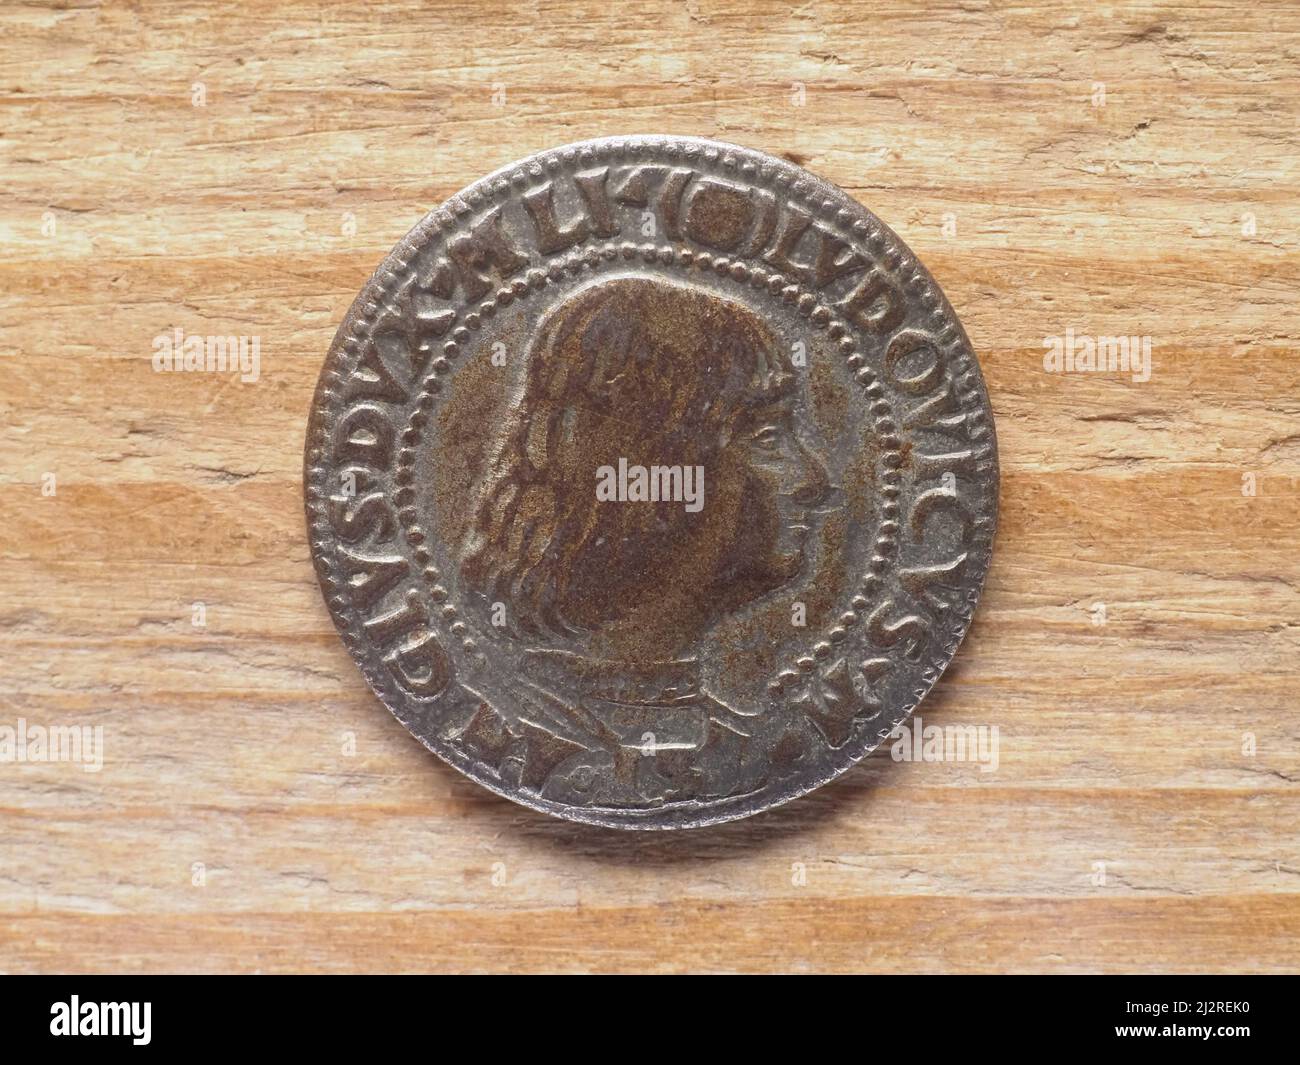 Ancient Milanese testone coin {ovb} showing obverse showing Gian Galeazzo Maria Sforza Stock Photo